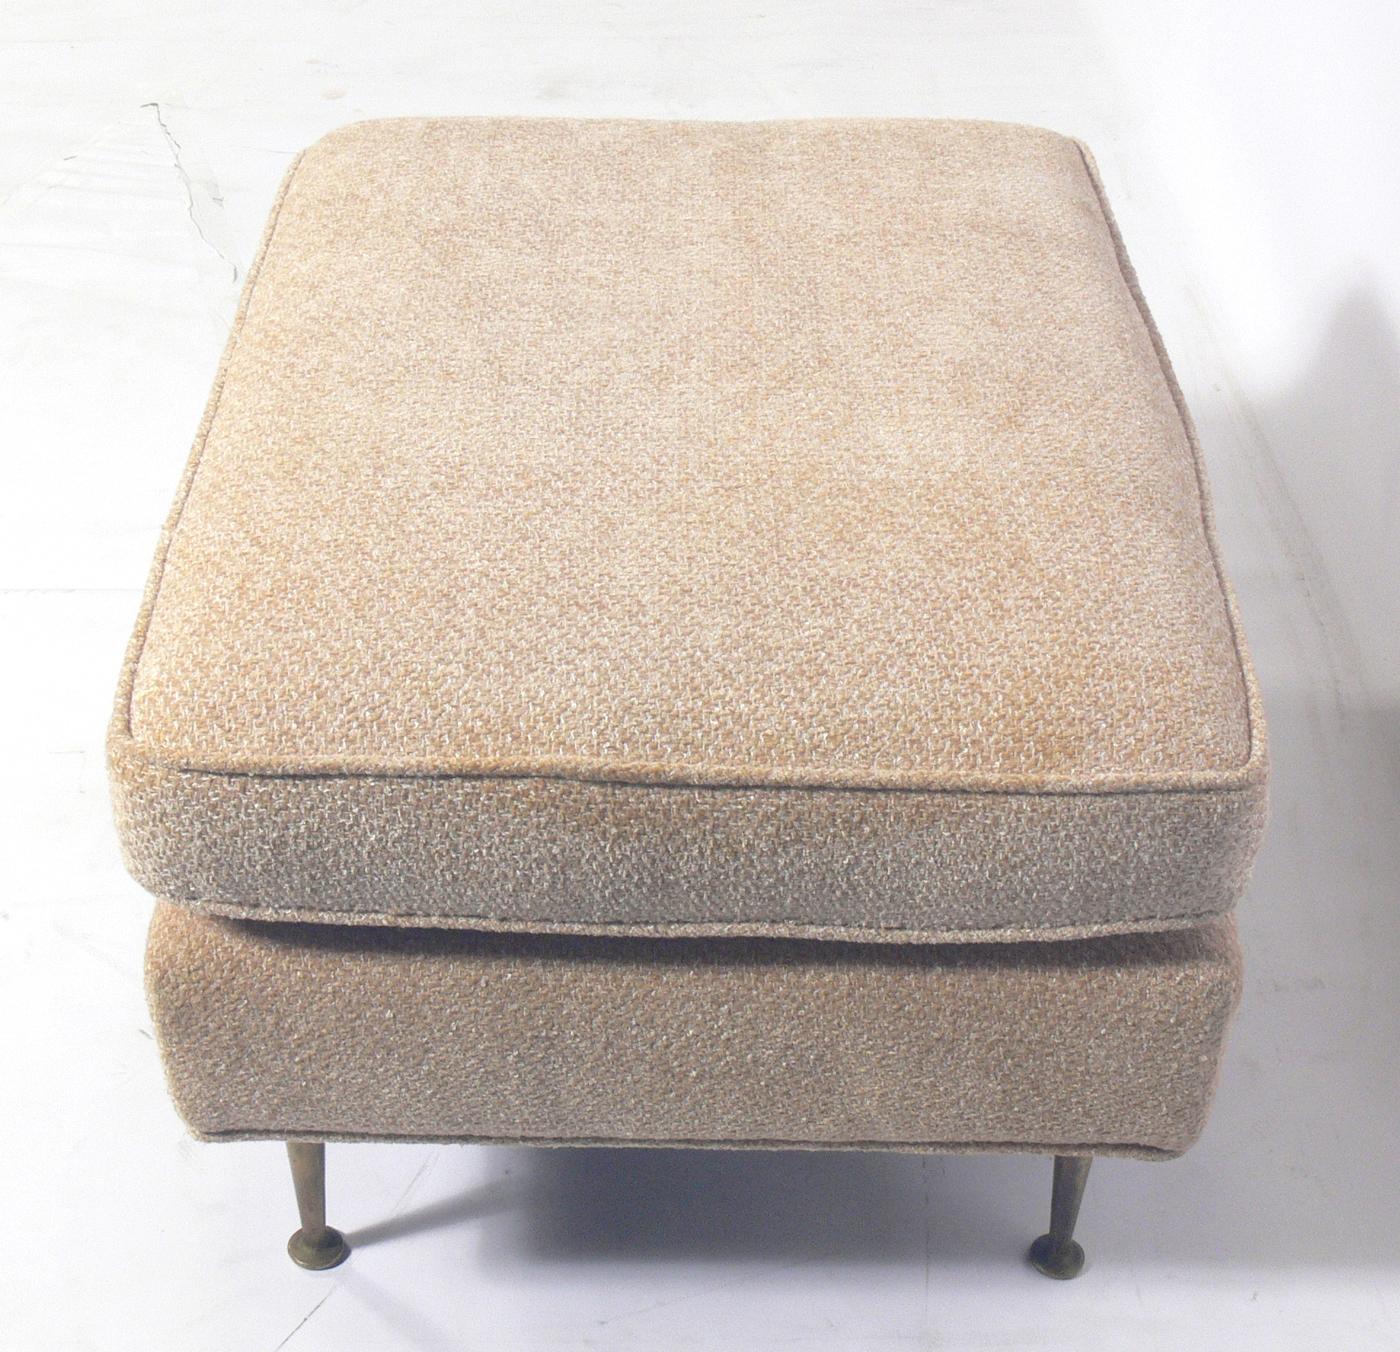 Modern stool or bench, attributed to T.H. Robsjohn-Gibbings, American, circa 1950s. This piece is currently being reupholstered and can be completed in your fabric at no additional charge. Simply send us three yards of your fabric after the purchase.